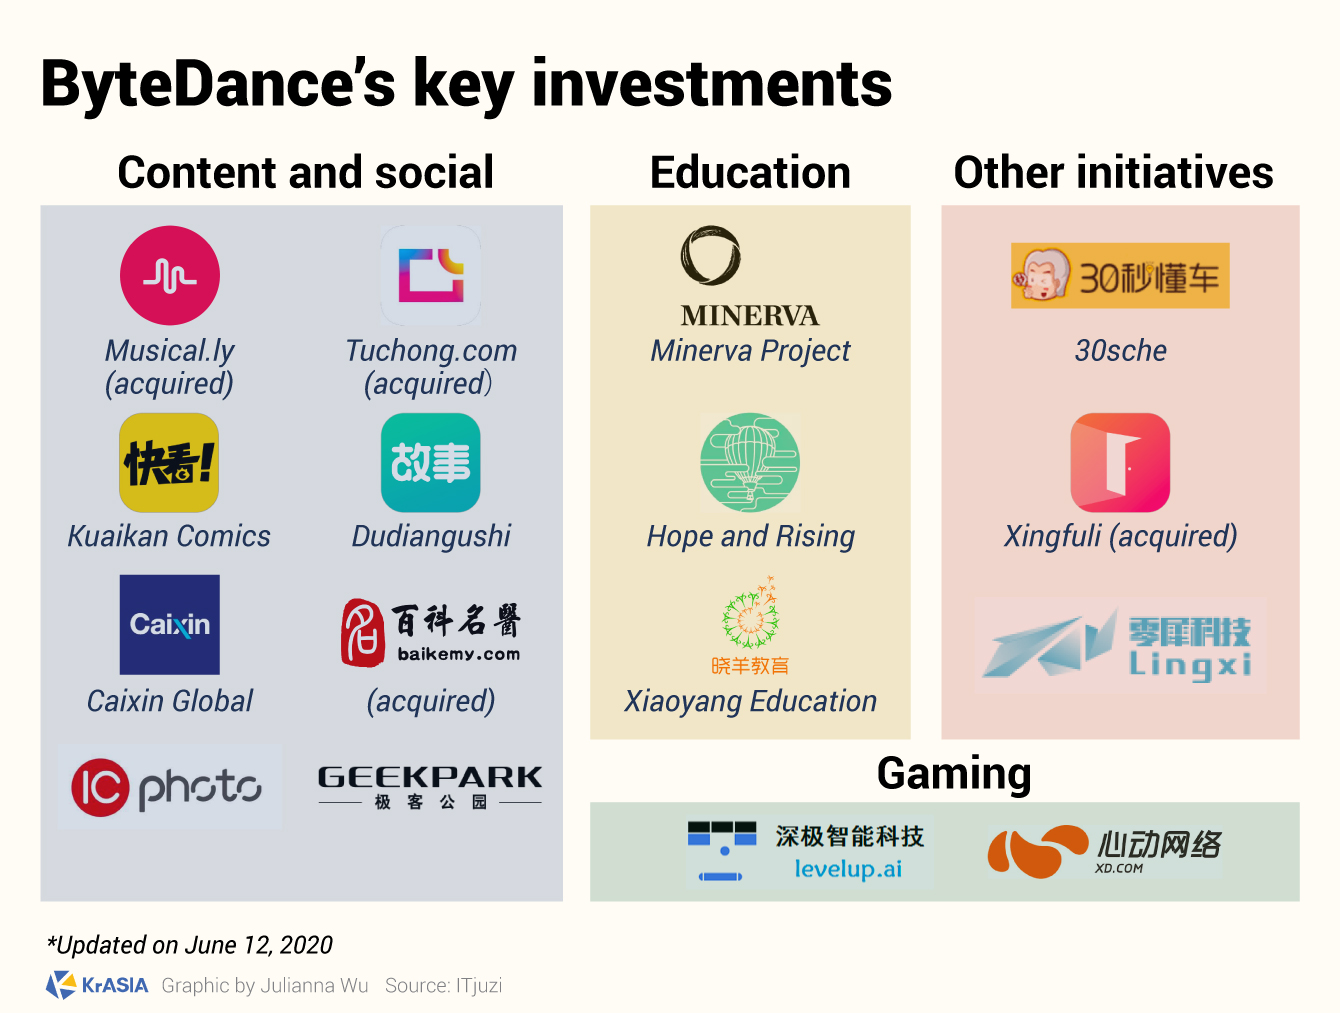 ByteDance's investments